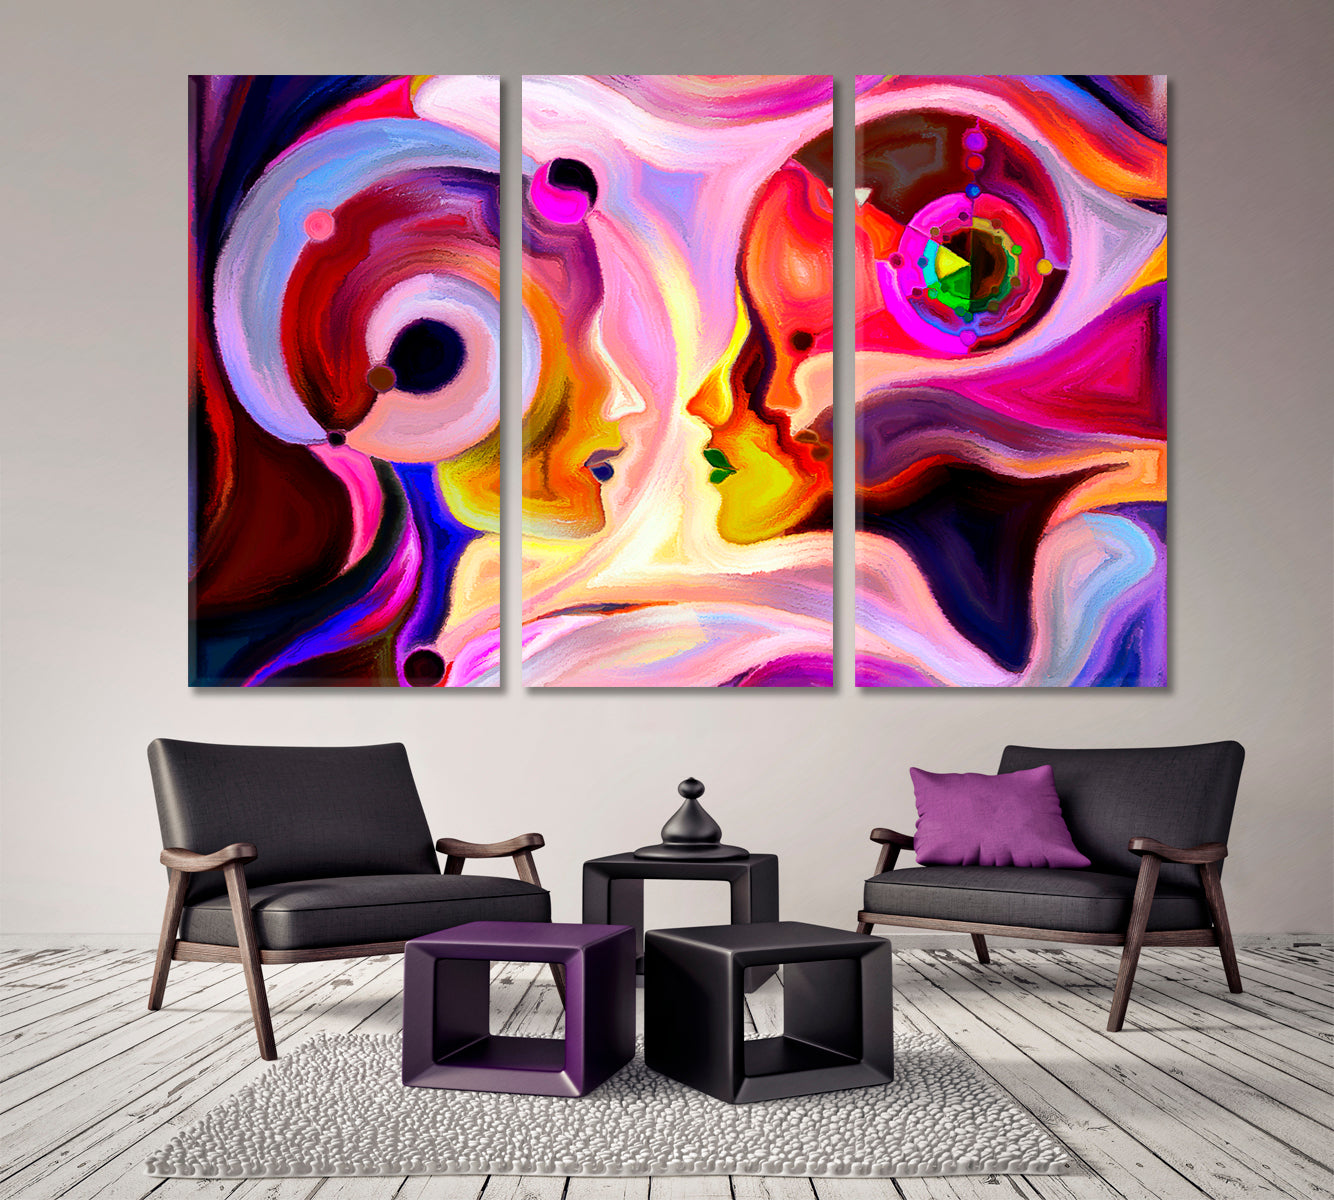 Modern Abstract Design Woman Man and Child Consciousness Art Artesty 3 panels 36" x 24" 